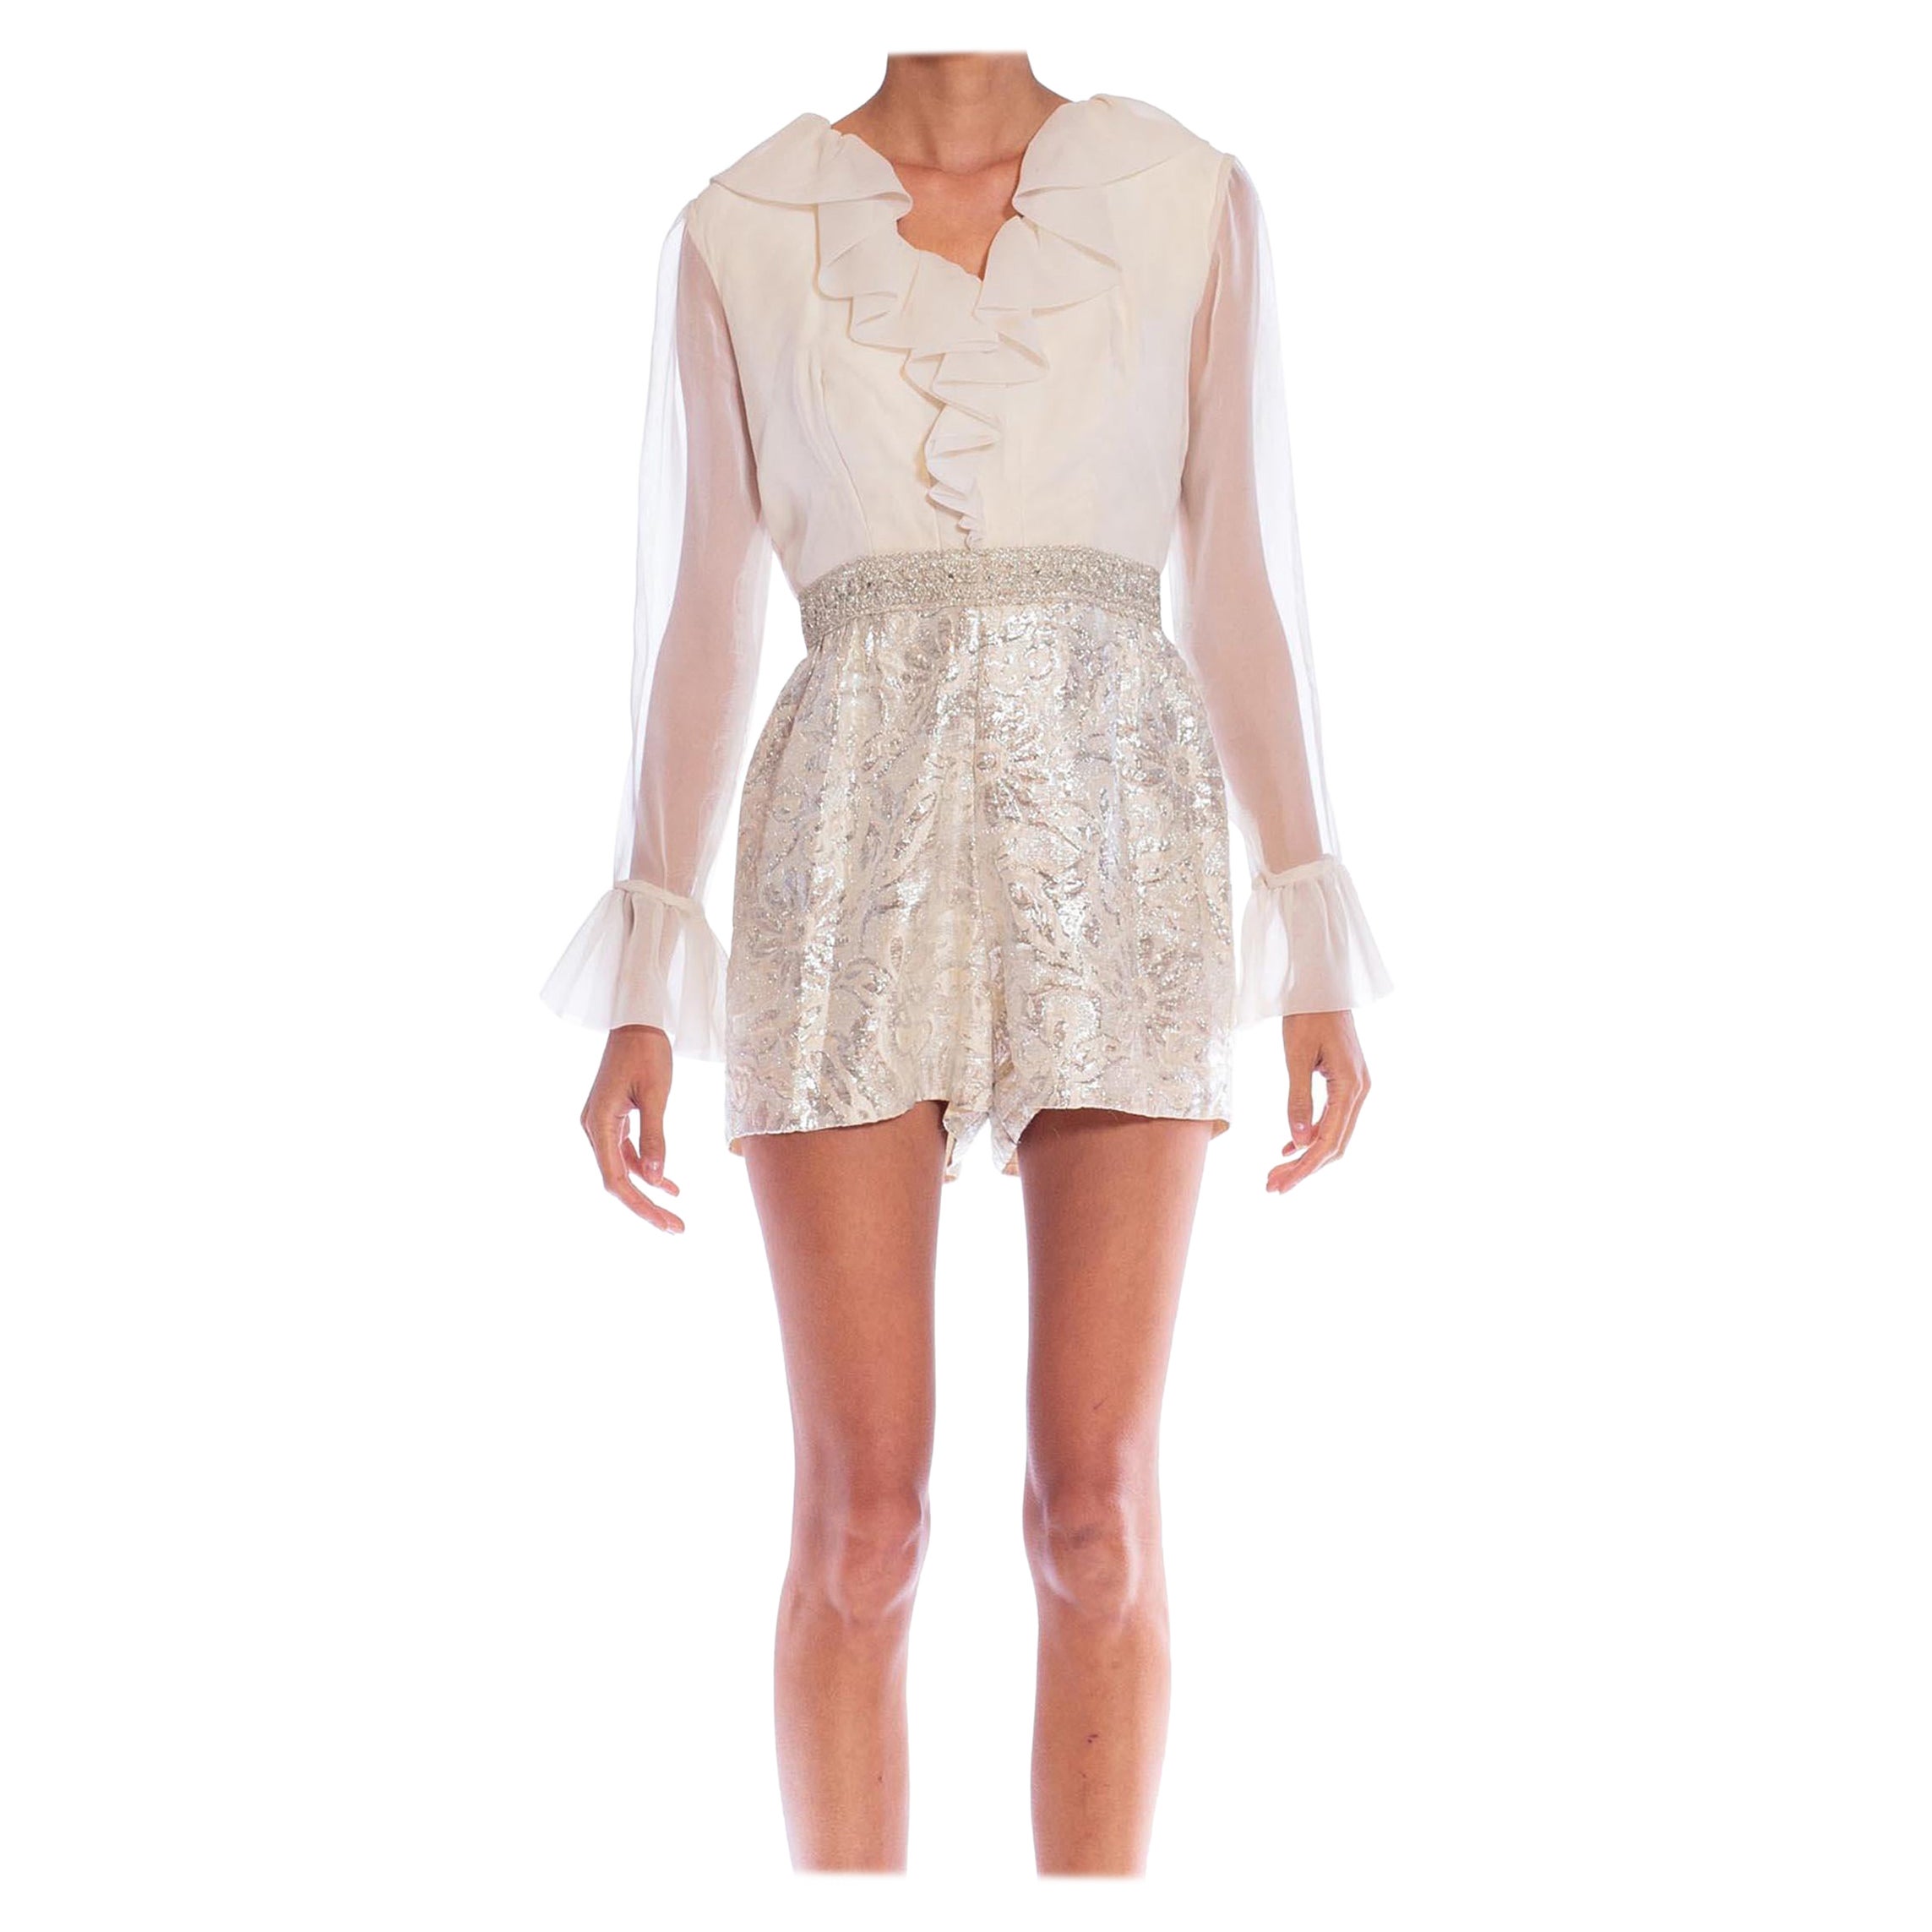 1960S White Poly Lurex Damask Romper With Ruffled Chiffon Top